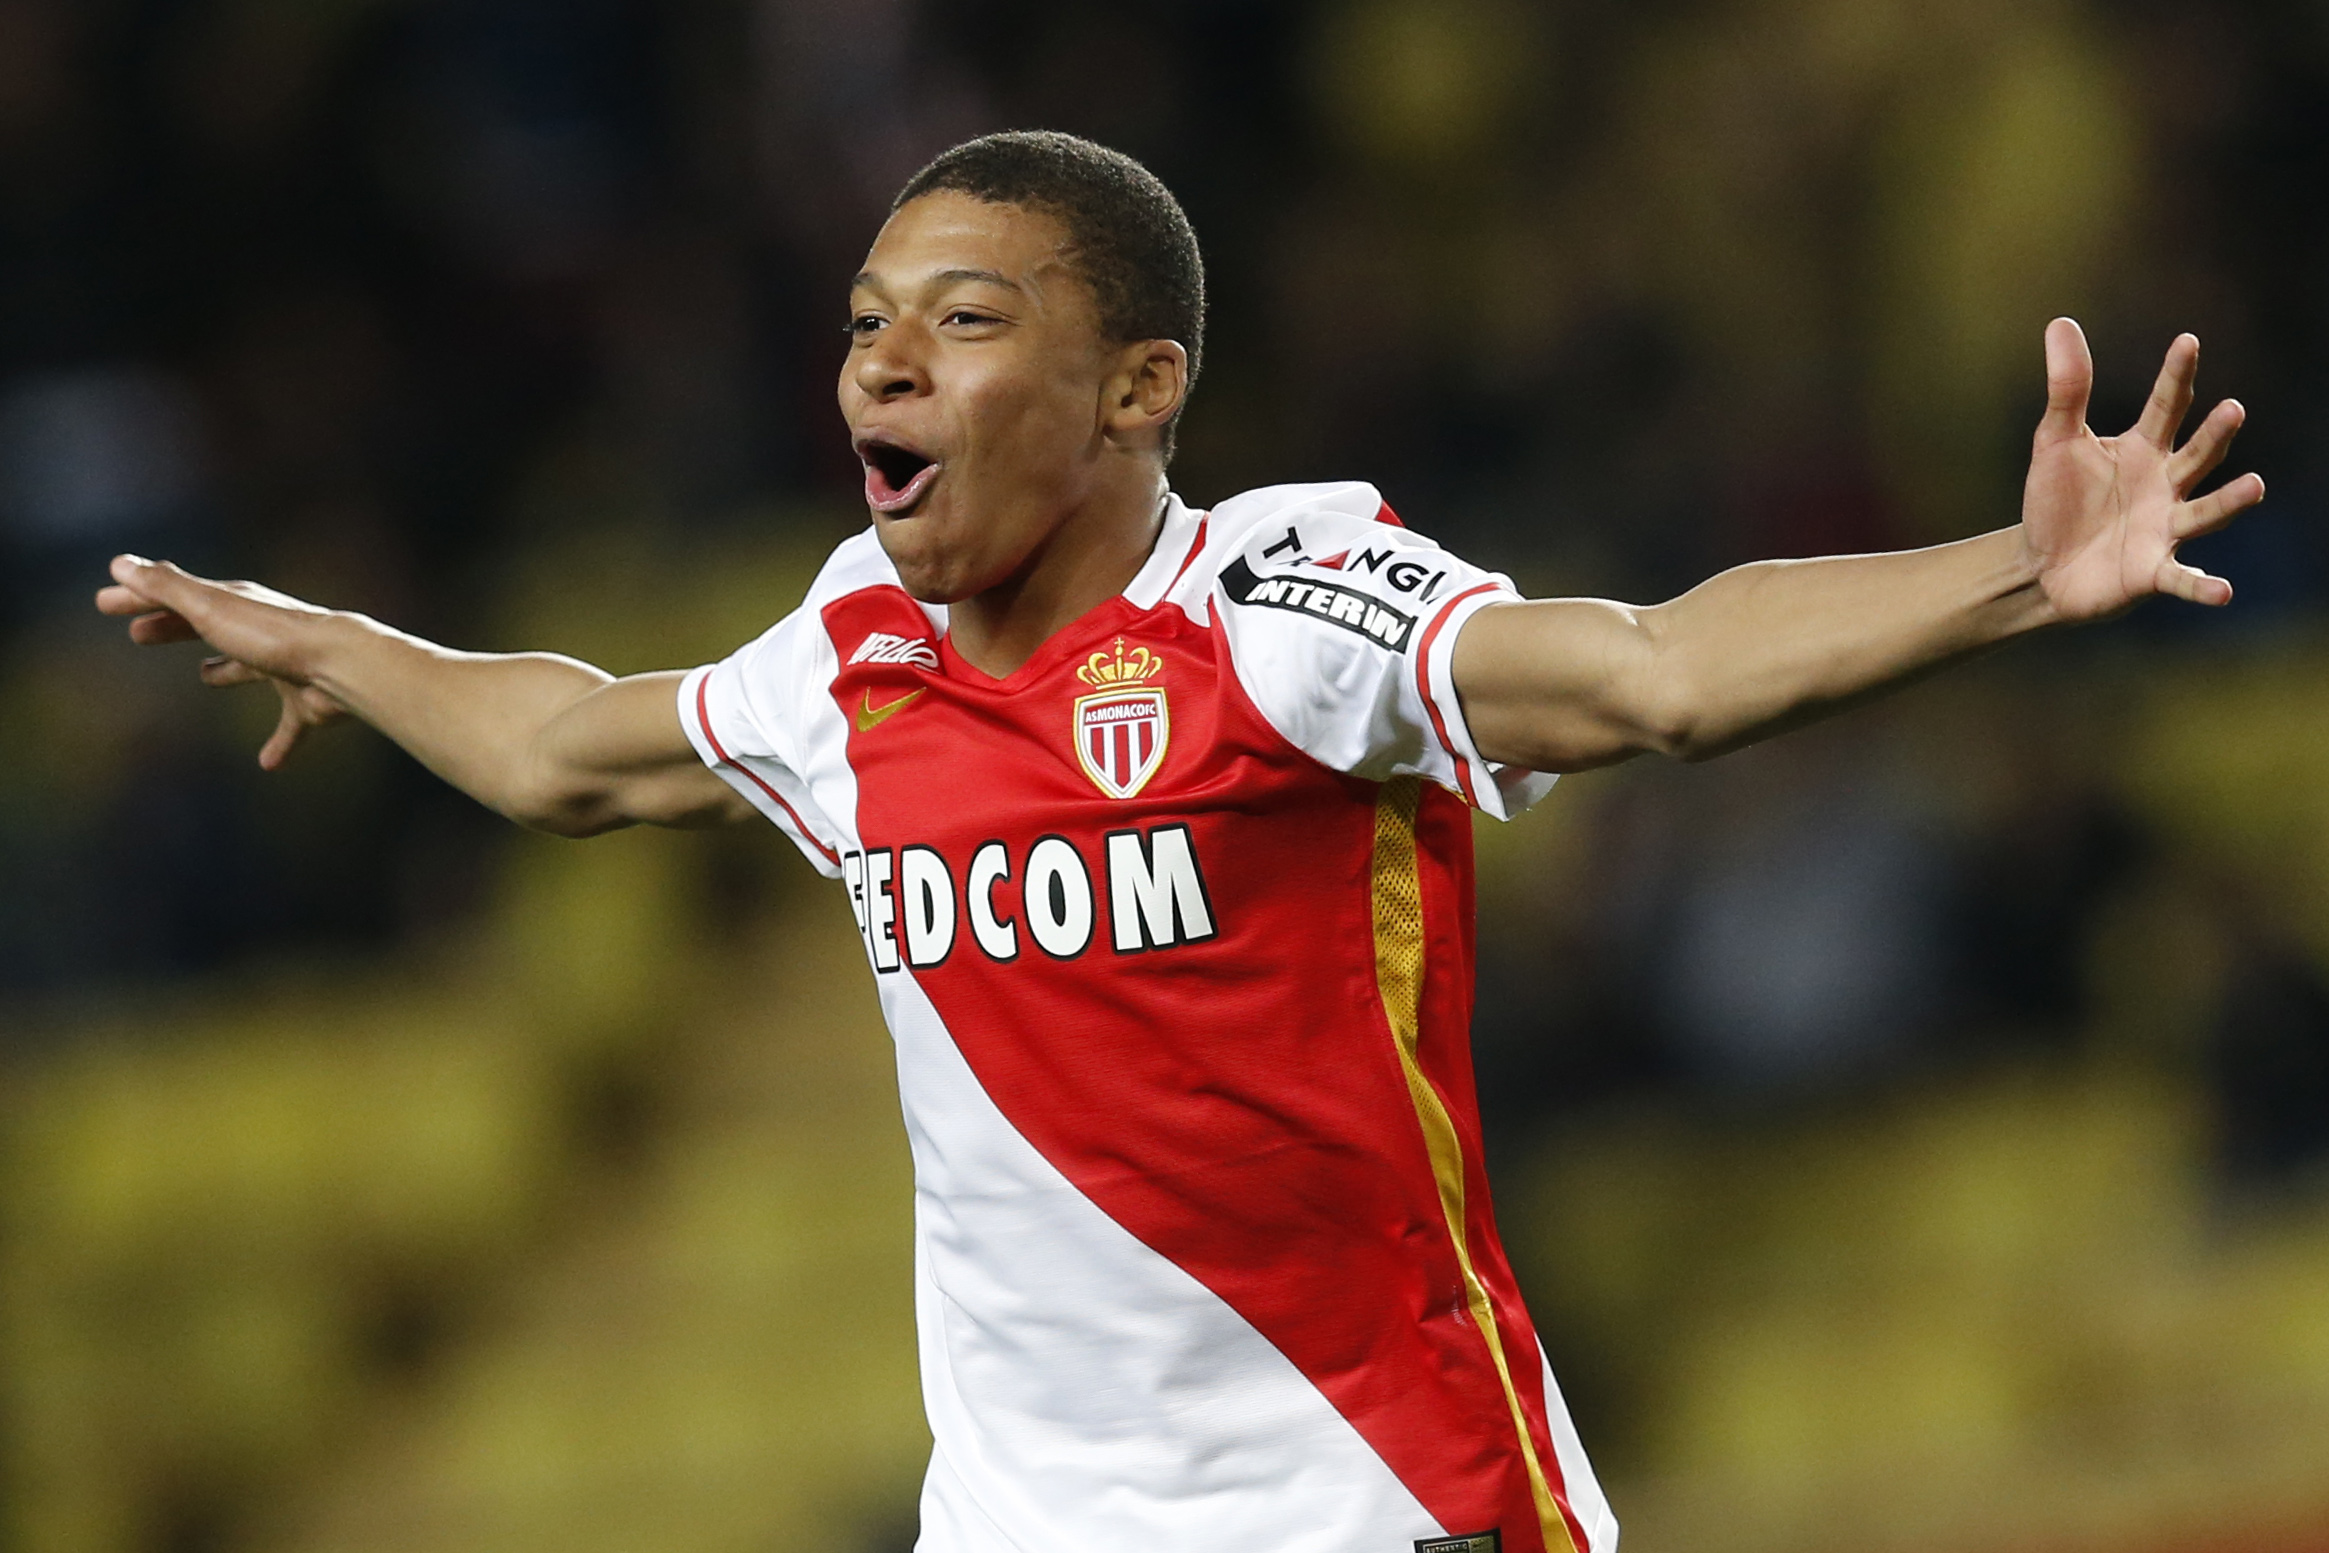 Kylian Mbappe celebrates a goal for Monaco against Troyes in February 2016.